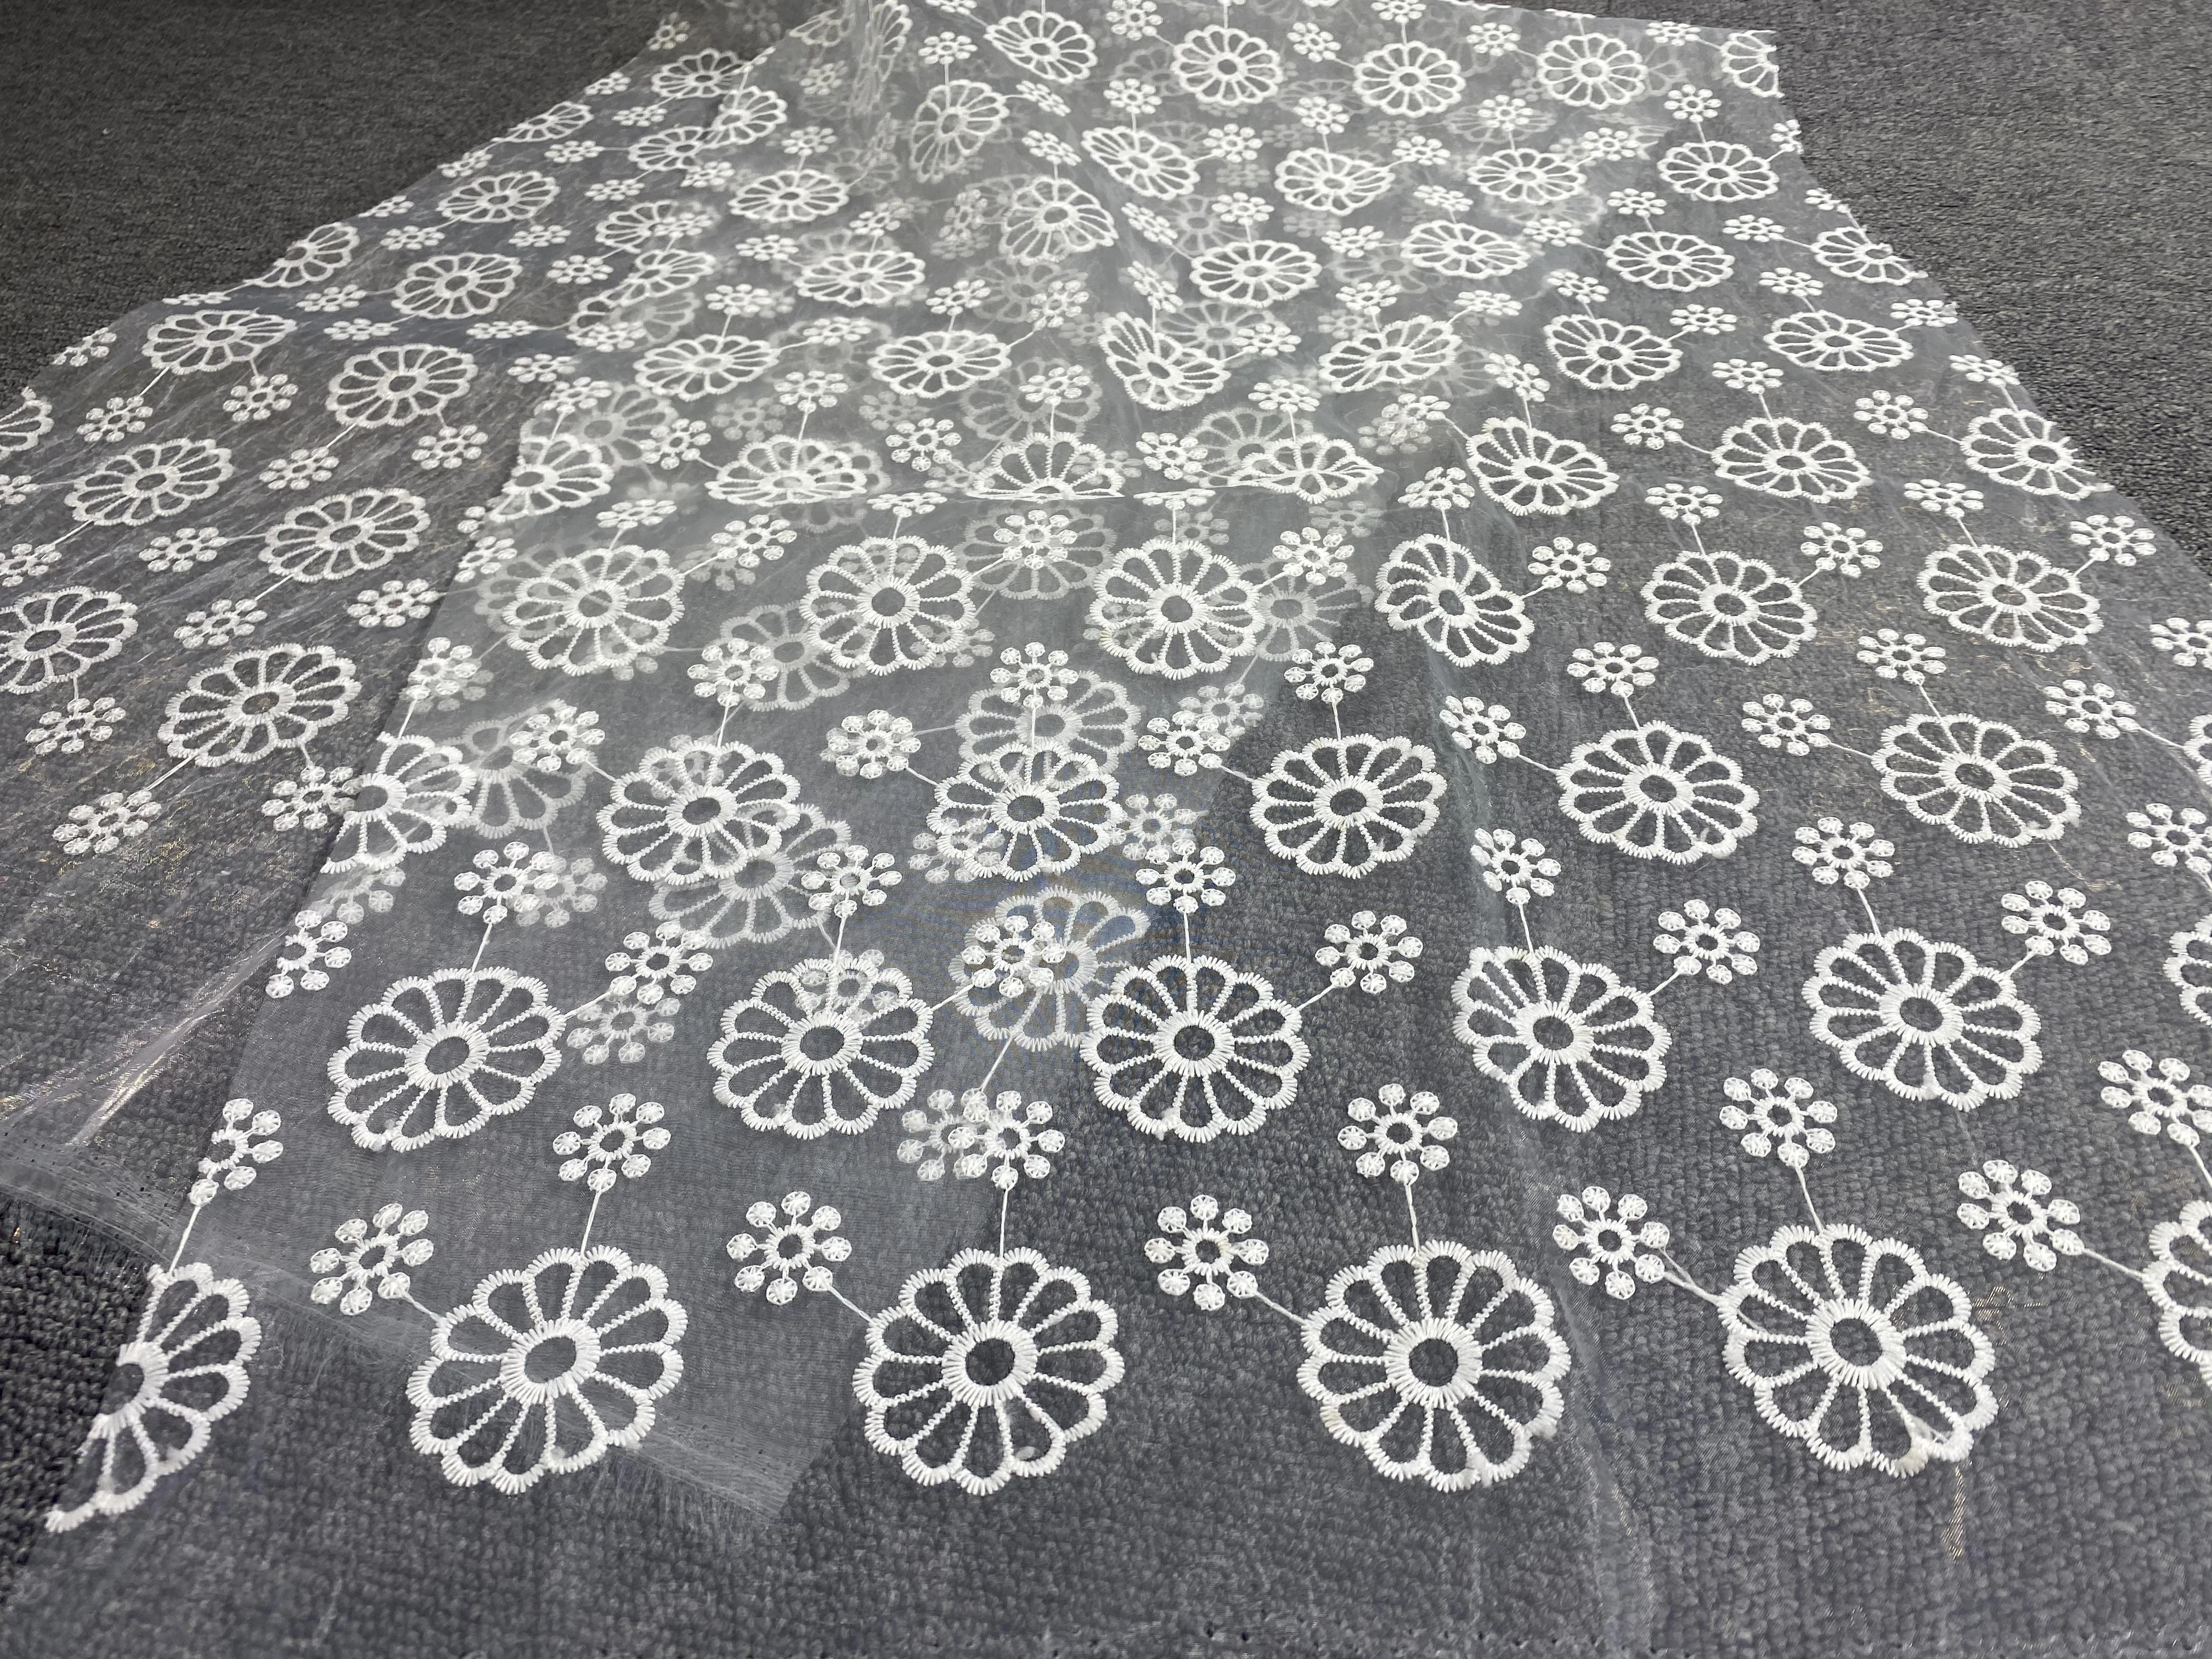 Wholesale High Quality Embroidery Lace Fabric